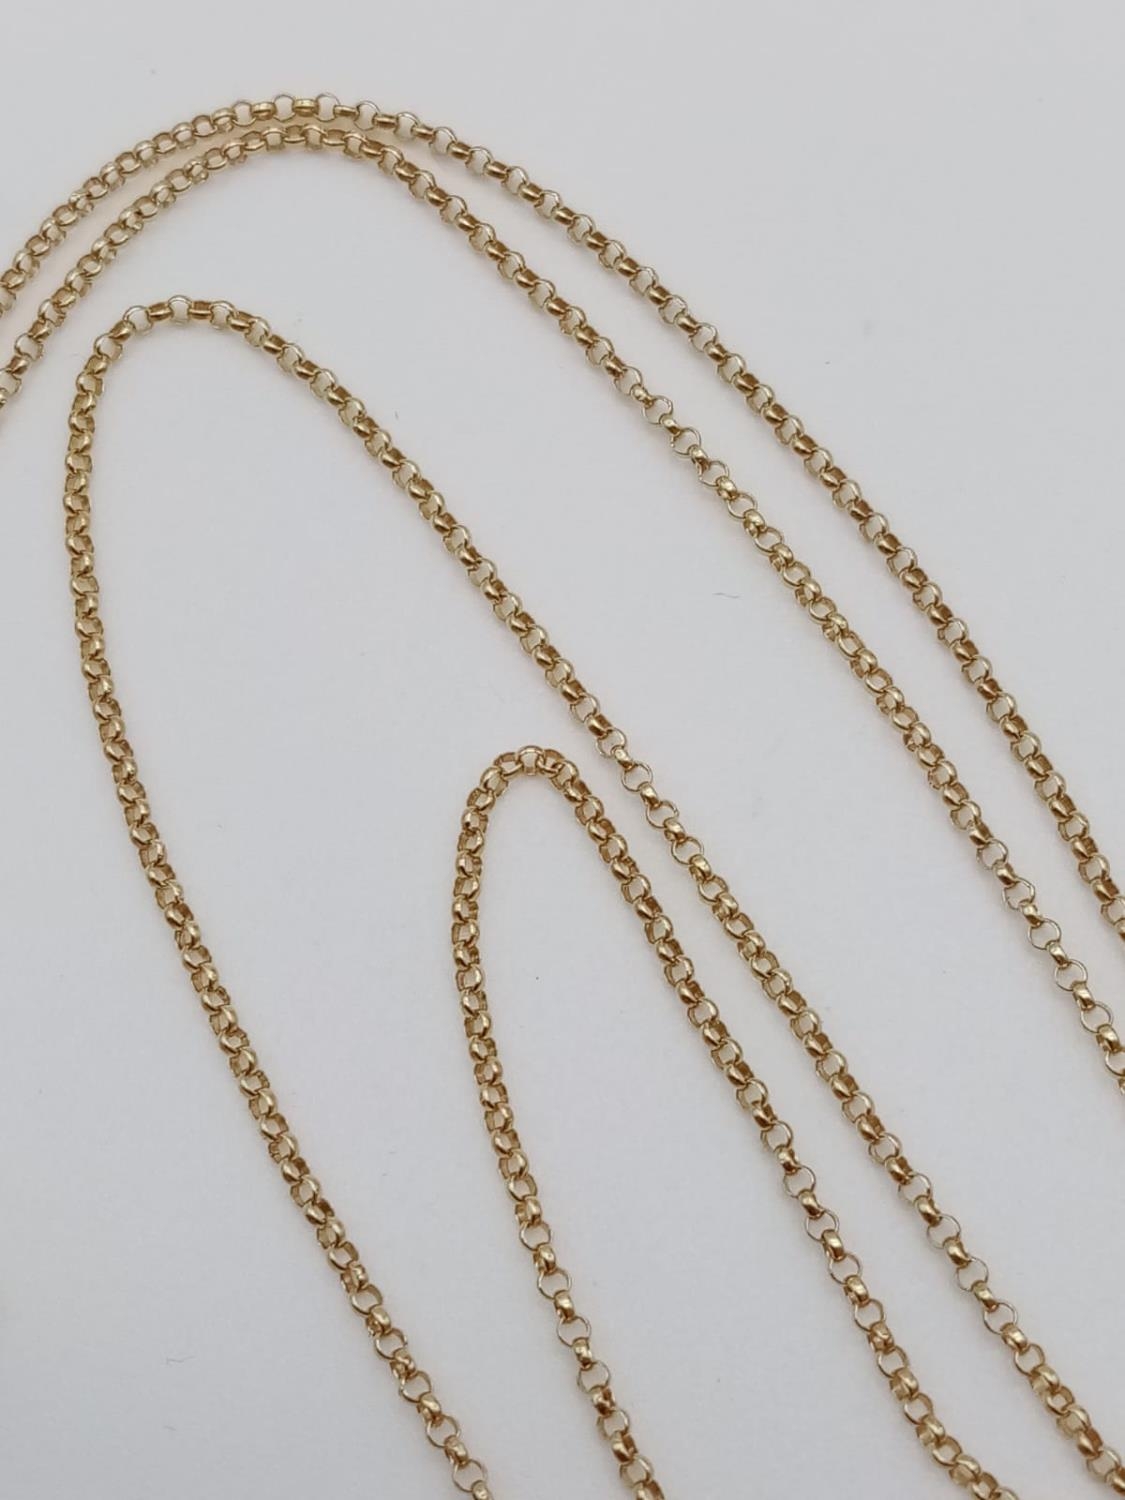 14k yellow gold pendant with round and baguette diamonds on 50cm long 14k gold chain, weight 4.2g - Image 4 of 6